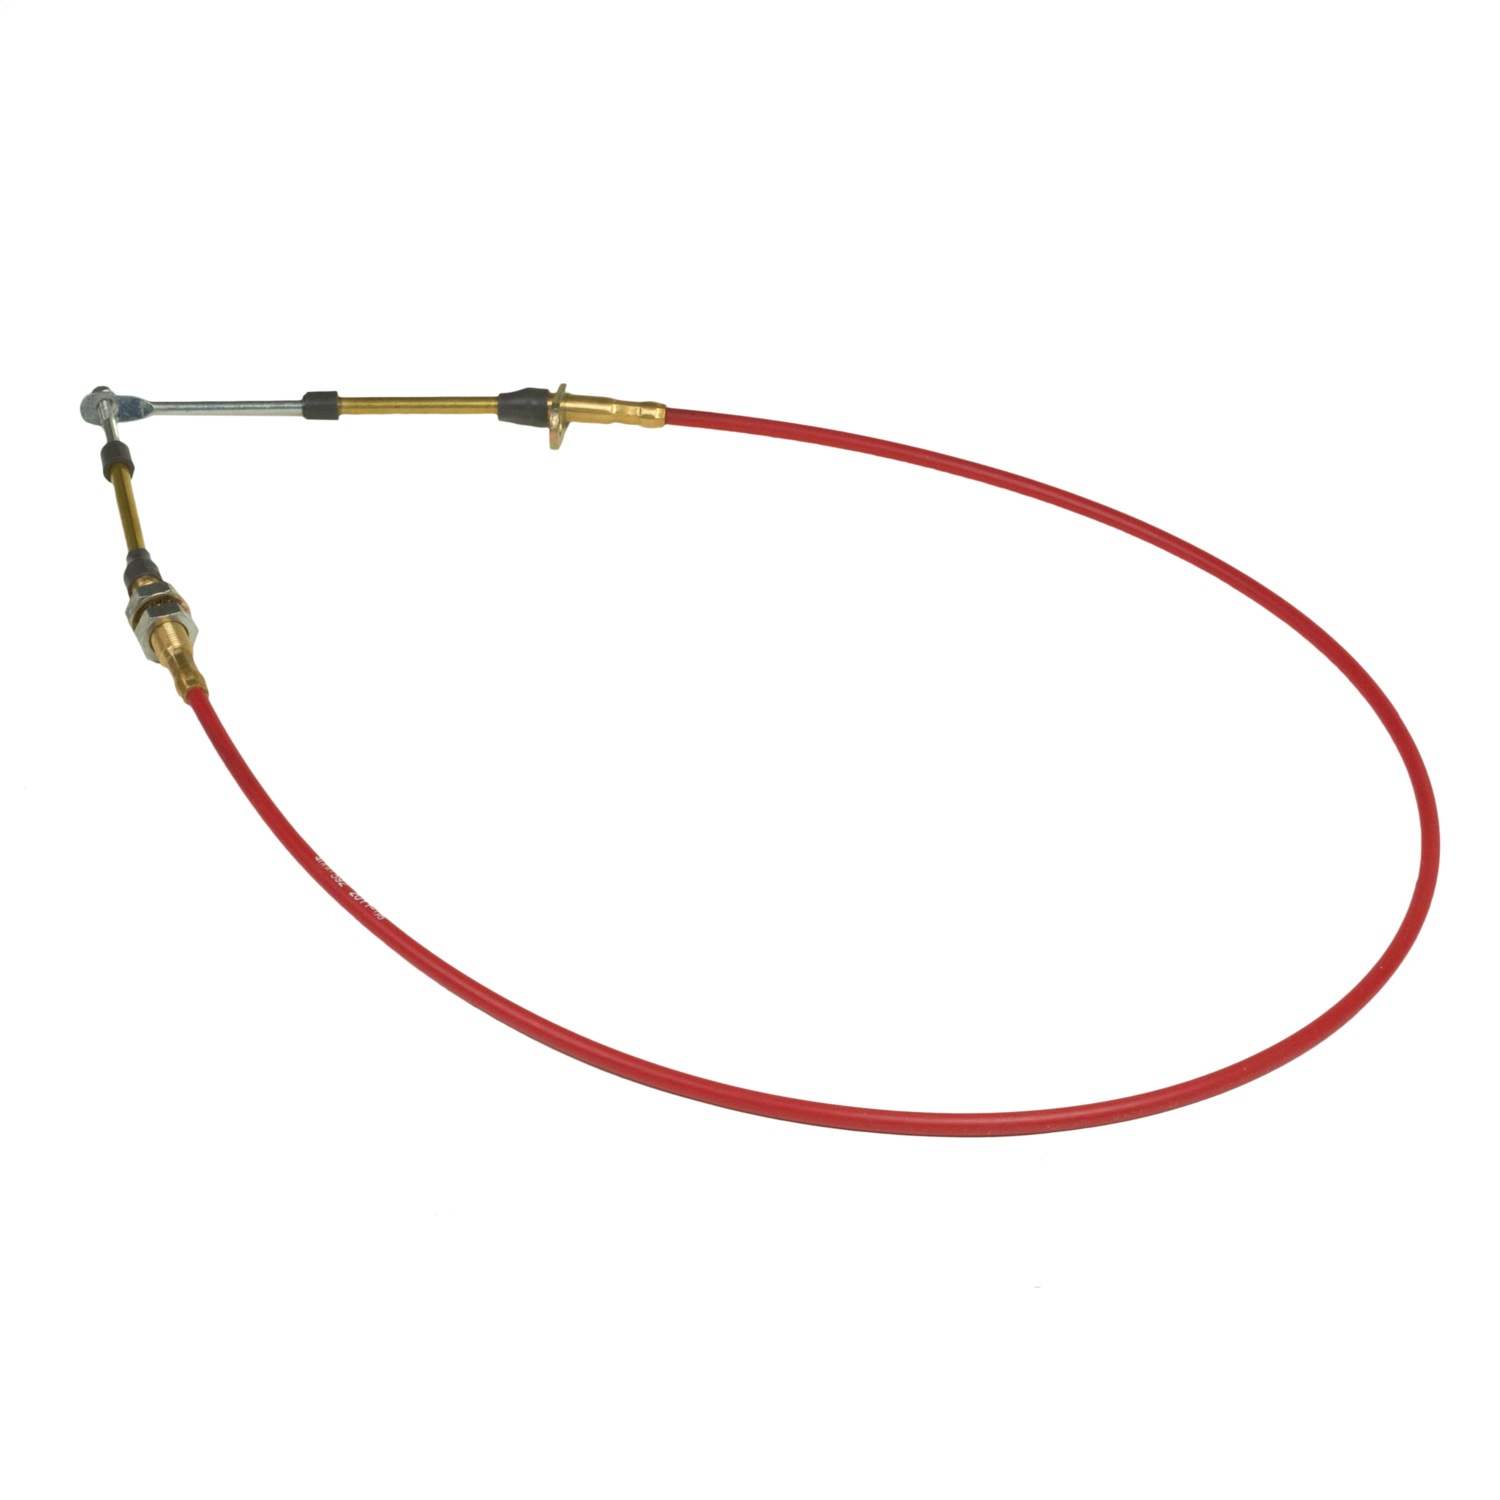 B&M B&M 80605 Performance Shifter Cable